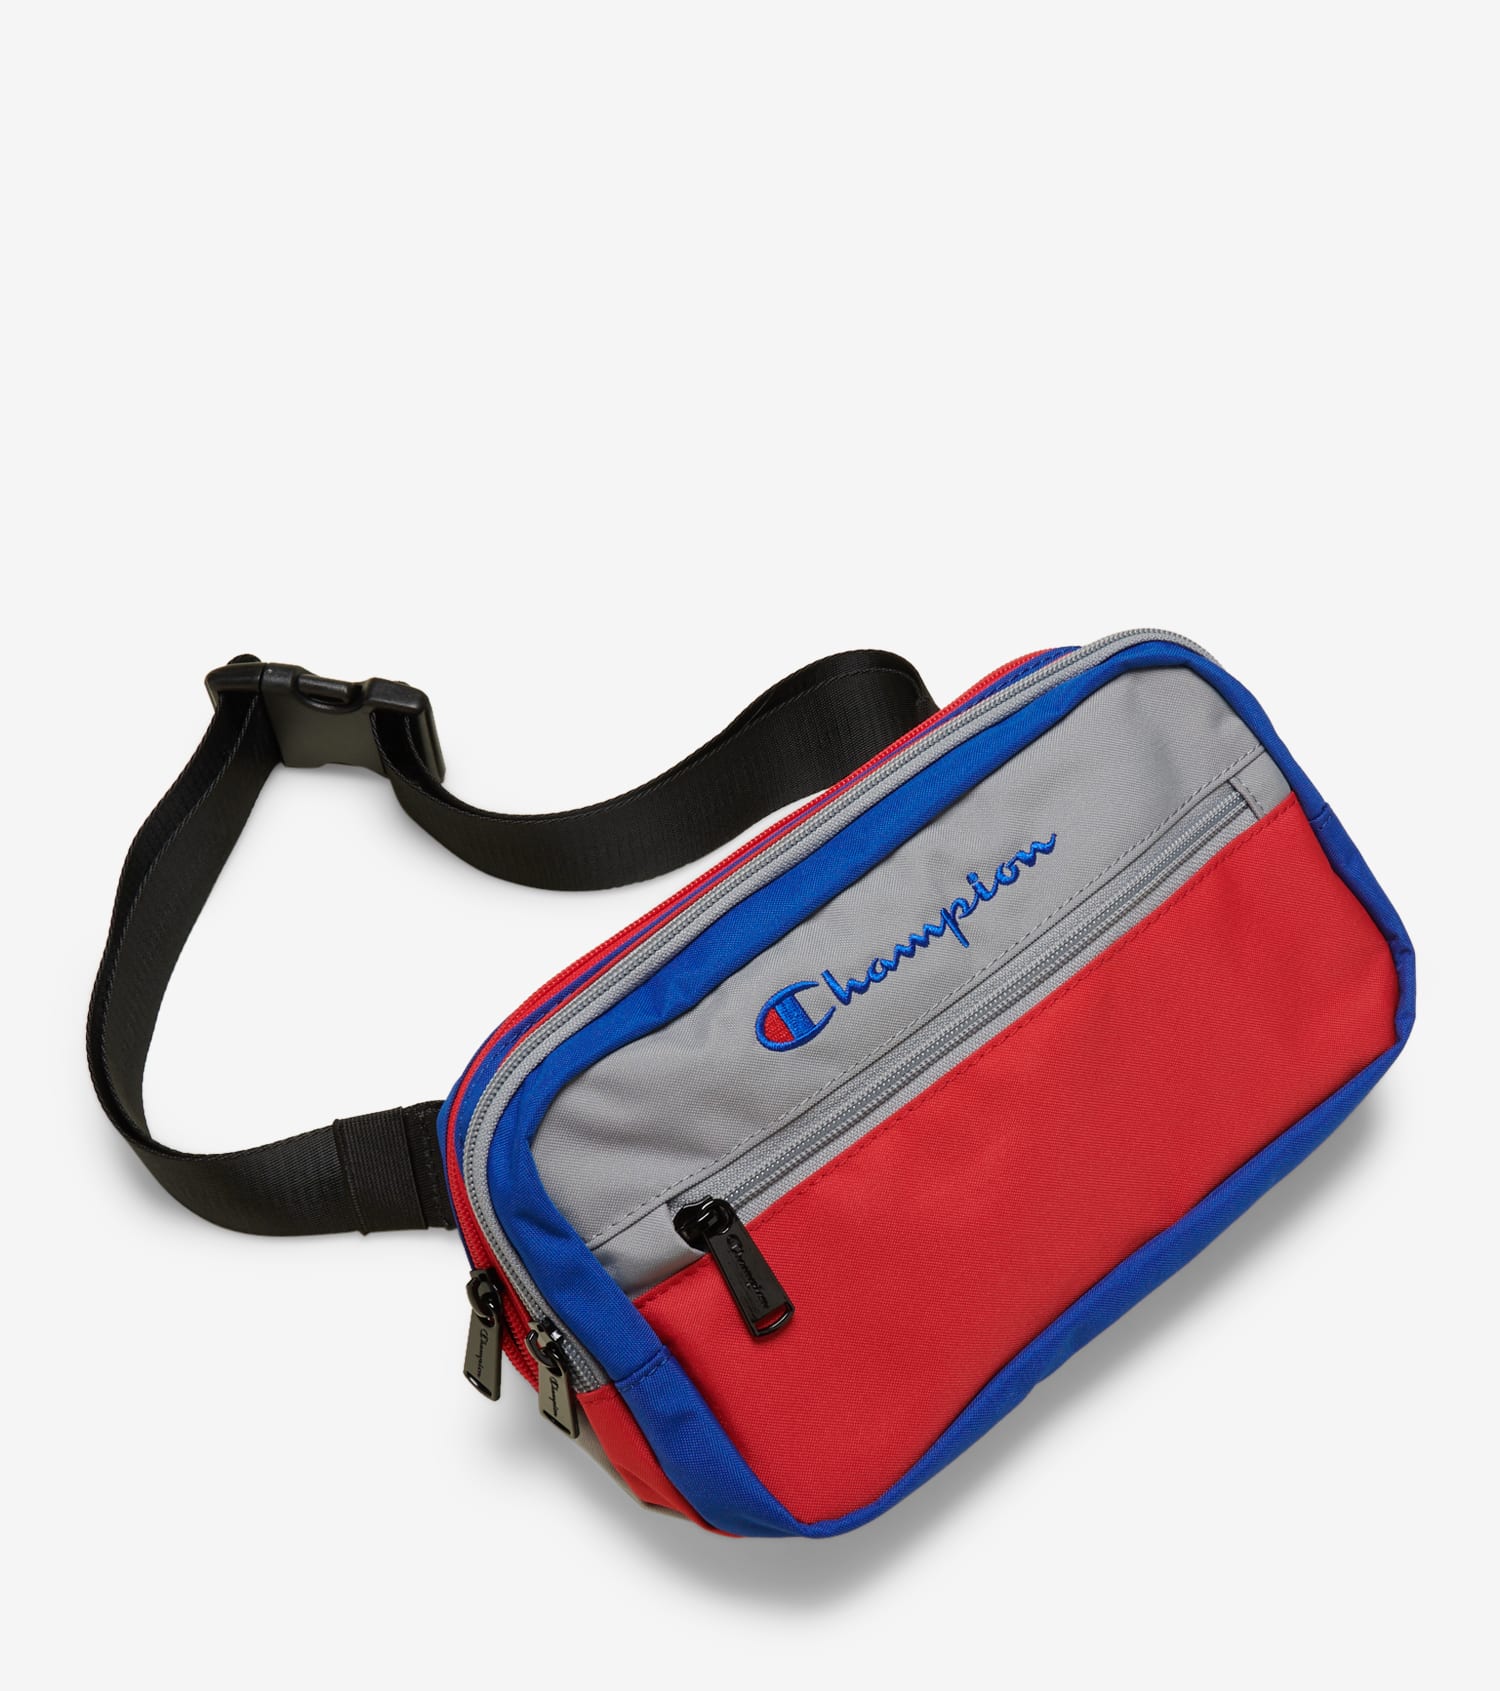 champion red fanny pack